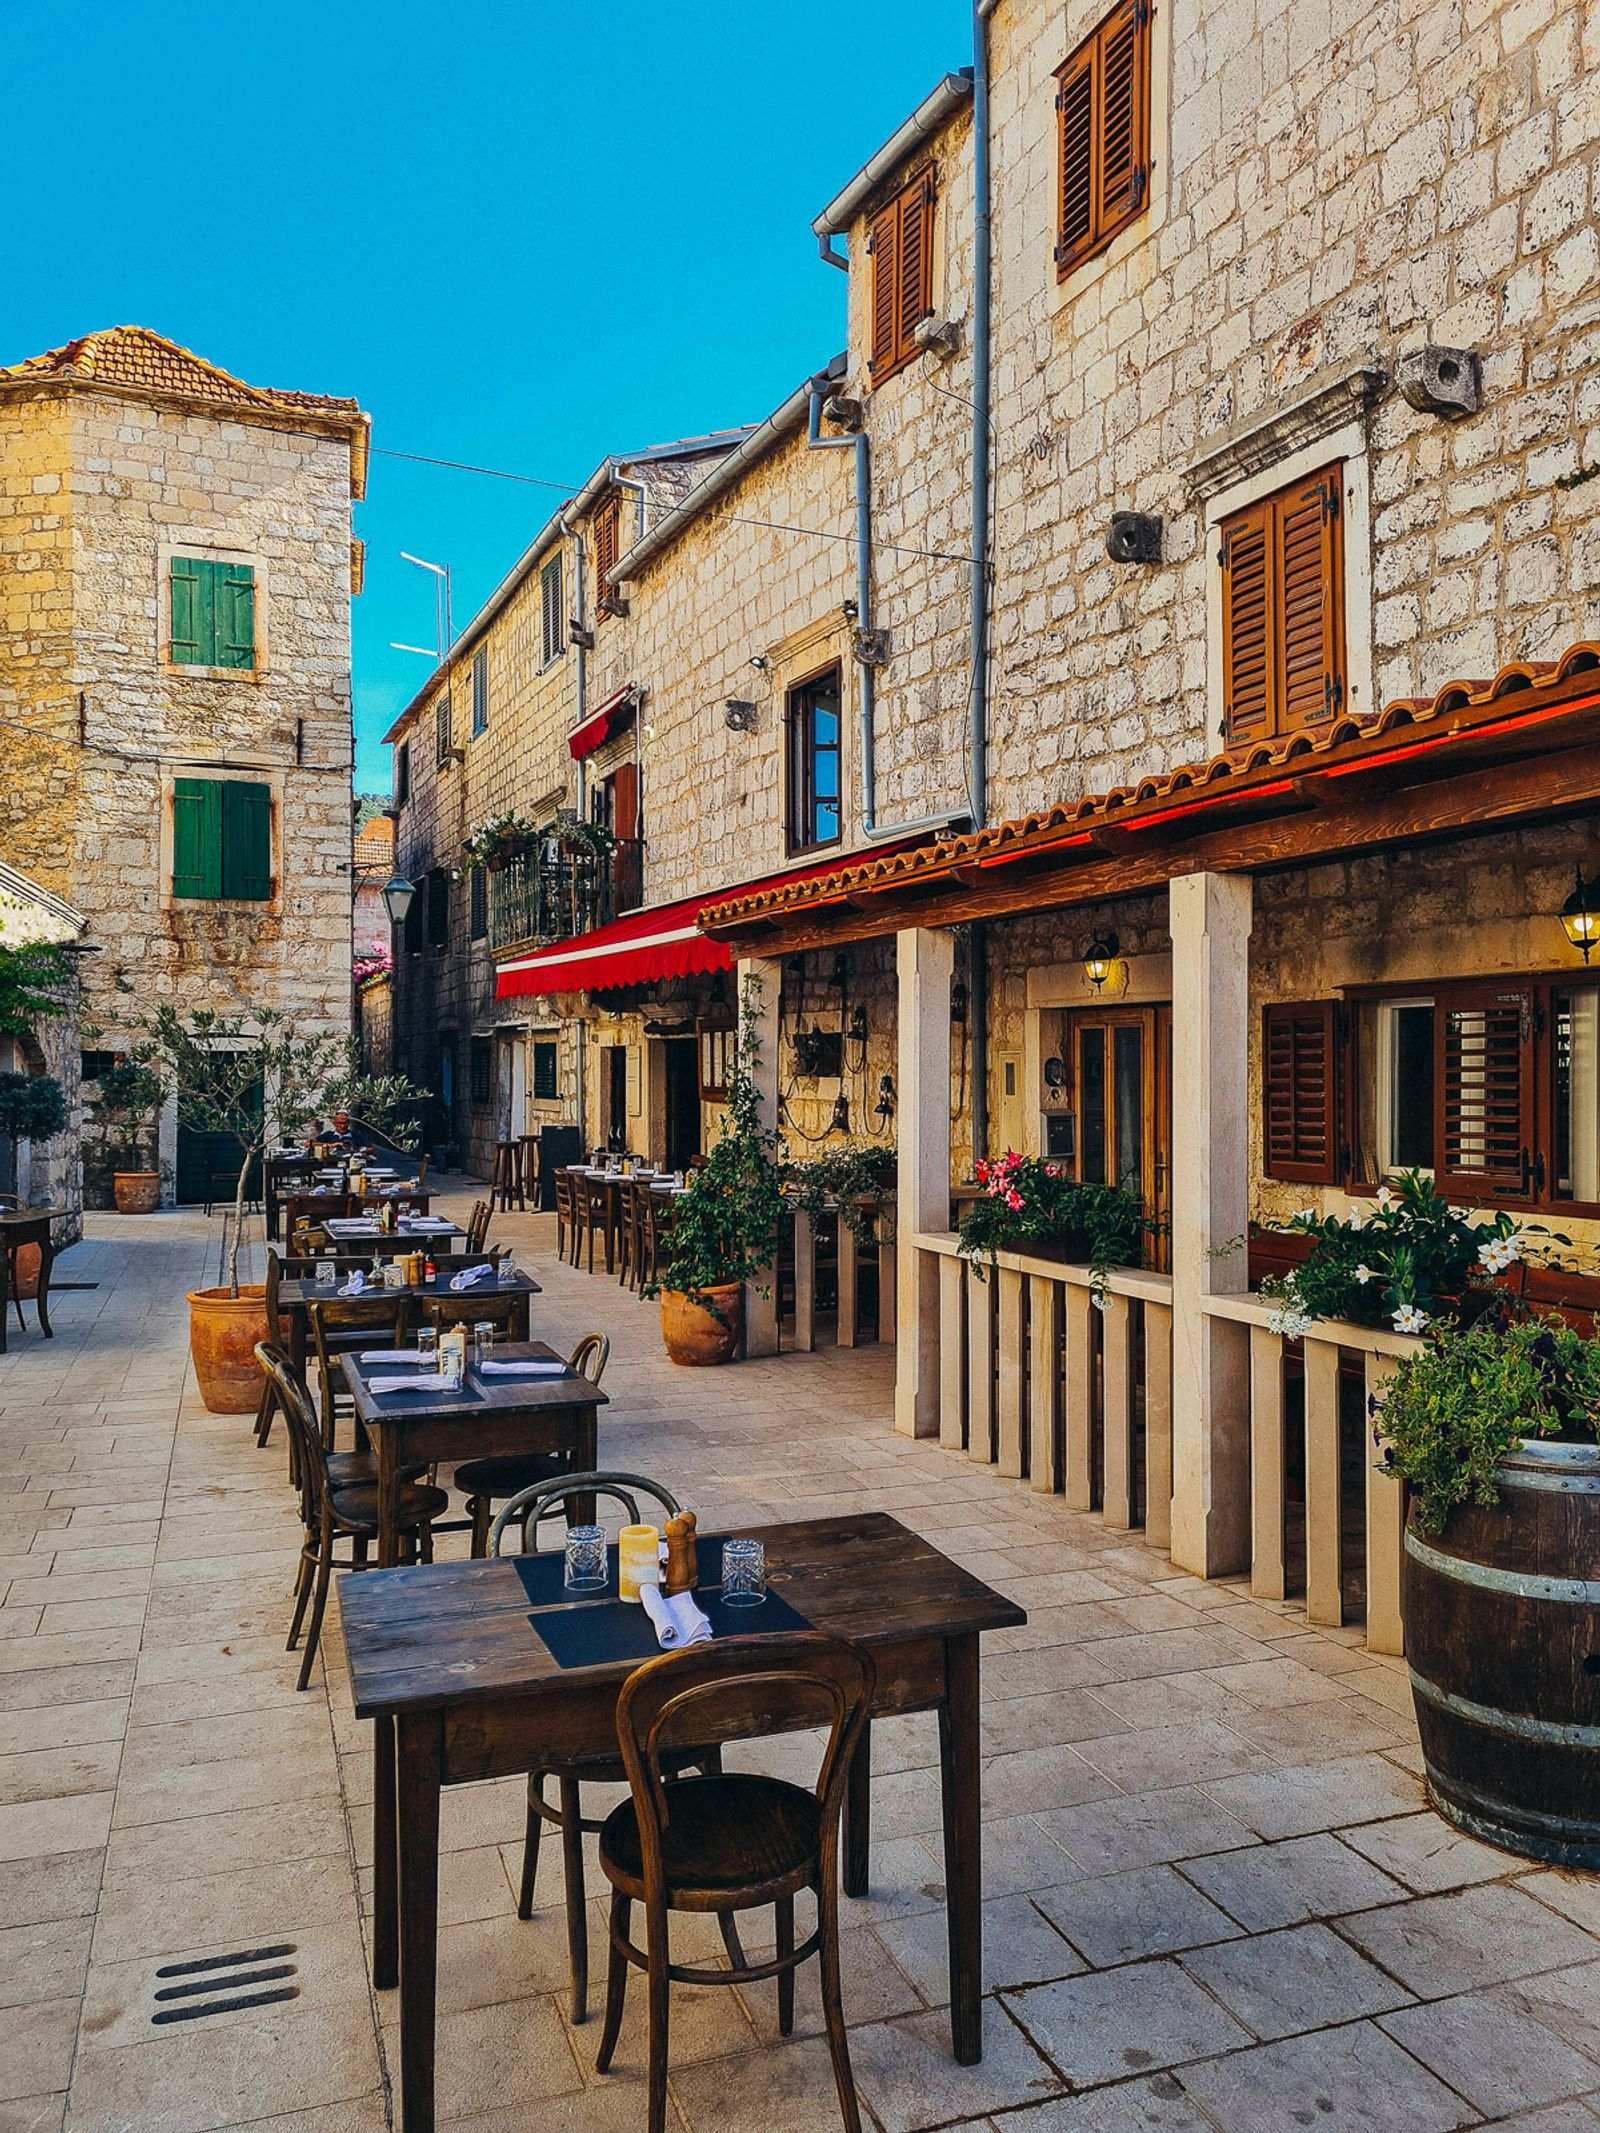 dining tables set for eating in the cobbled street in a courtyard surrounded by old stone buildings